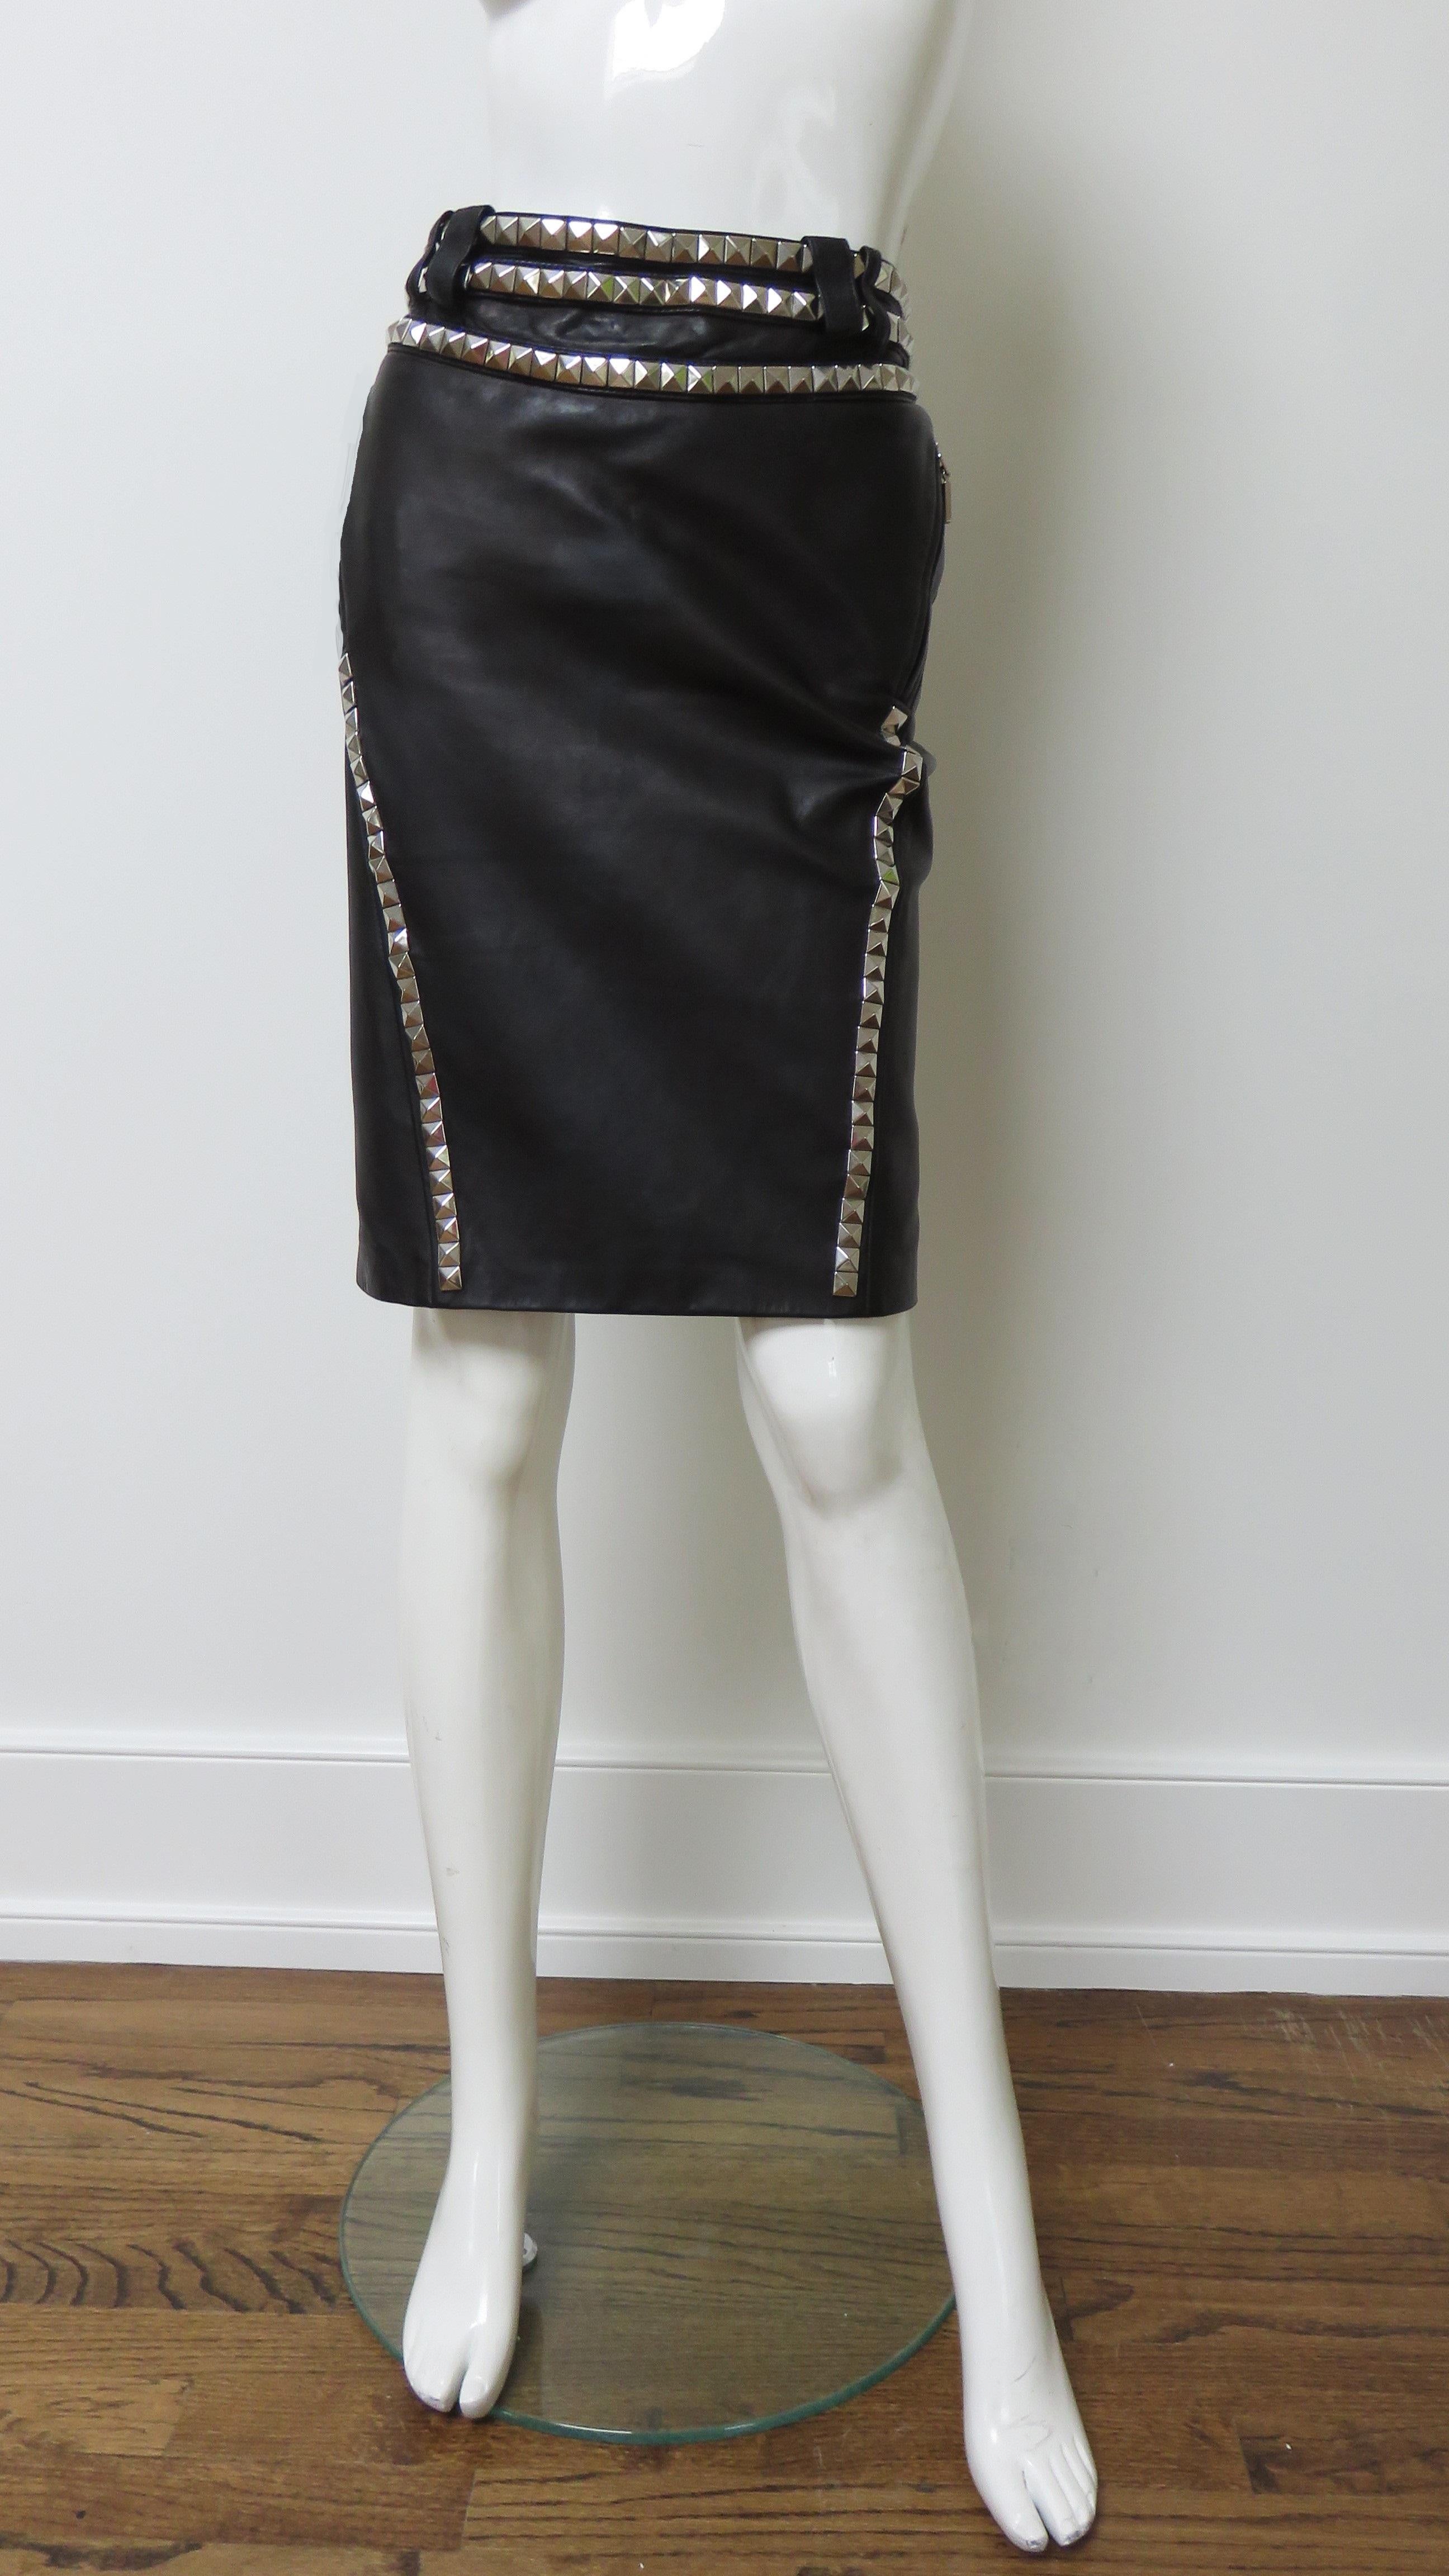 Verace Leather Skirt with Studs and Buckle Waist  For Sale 4